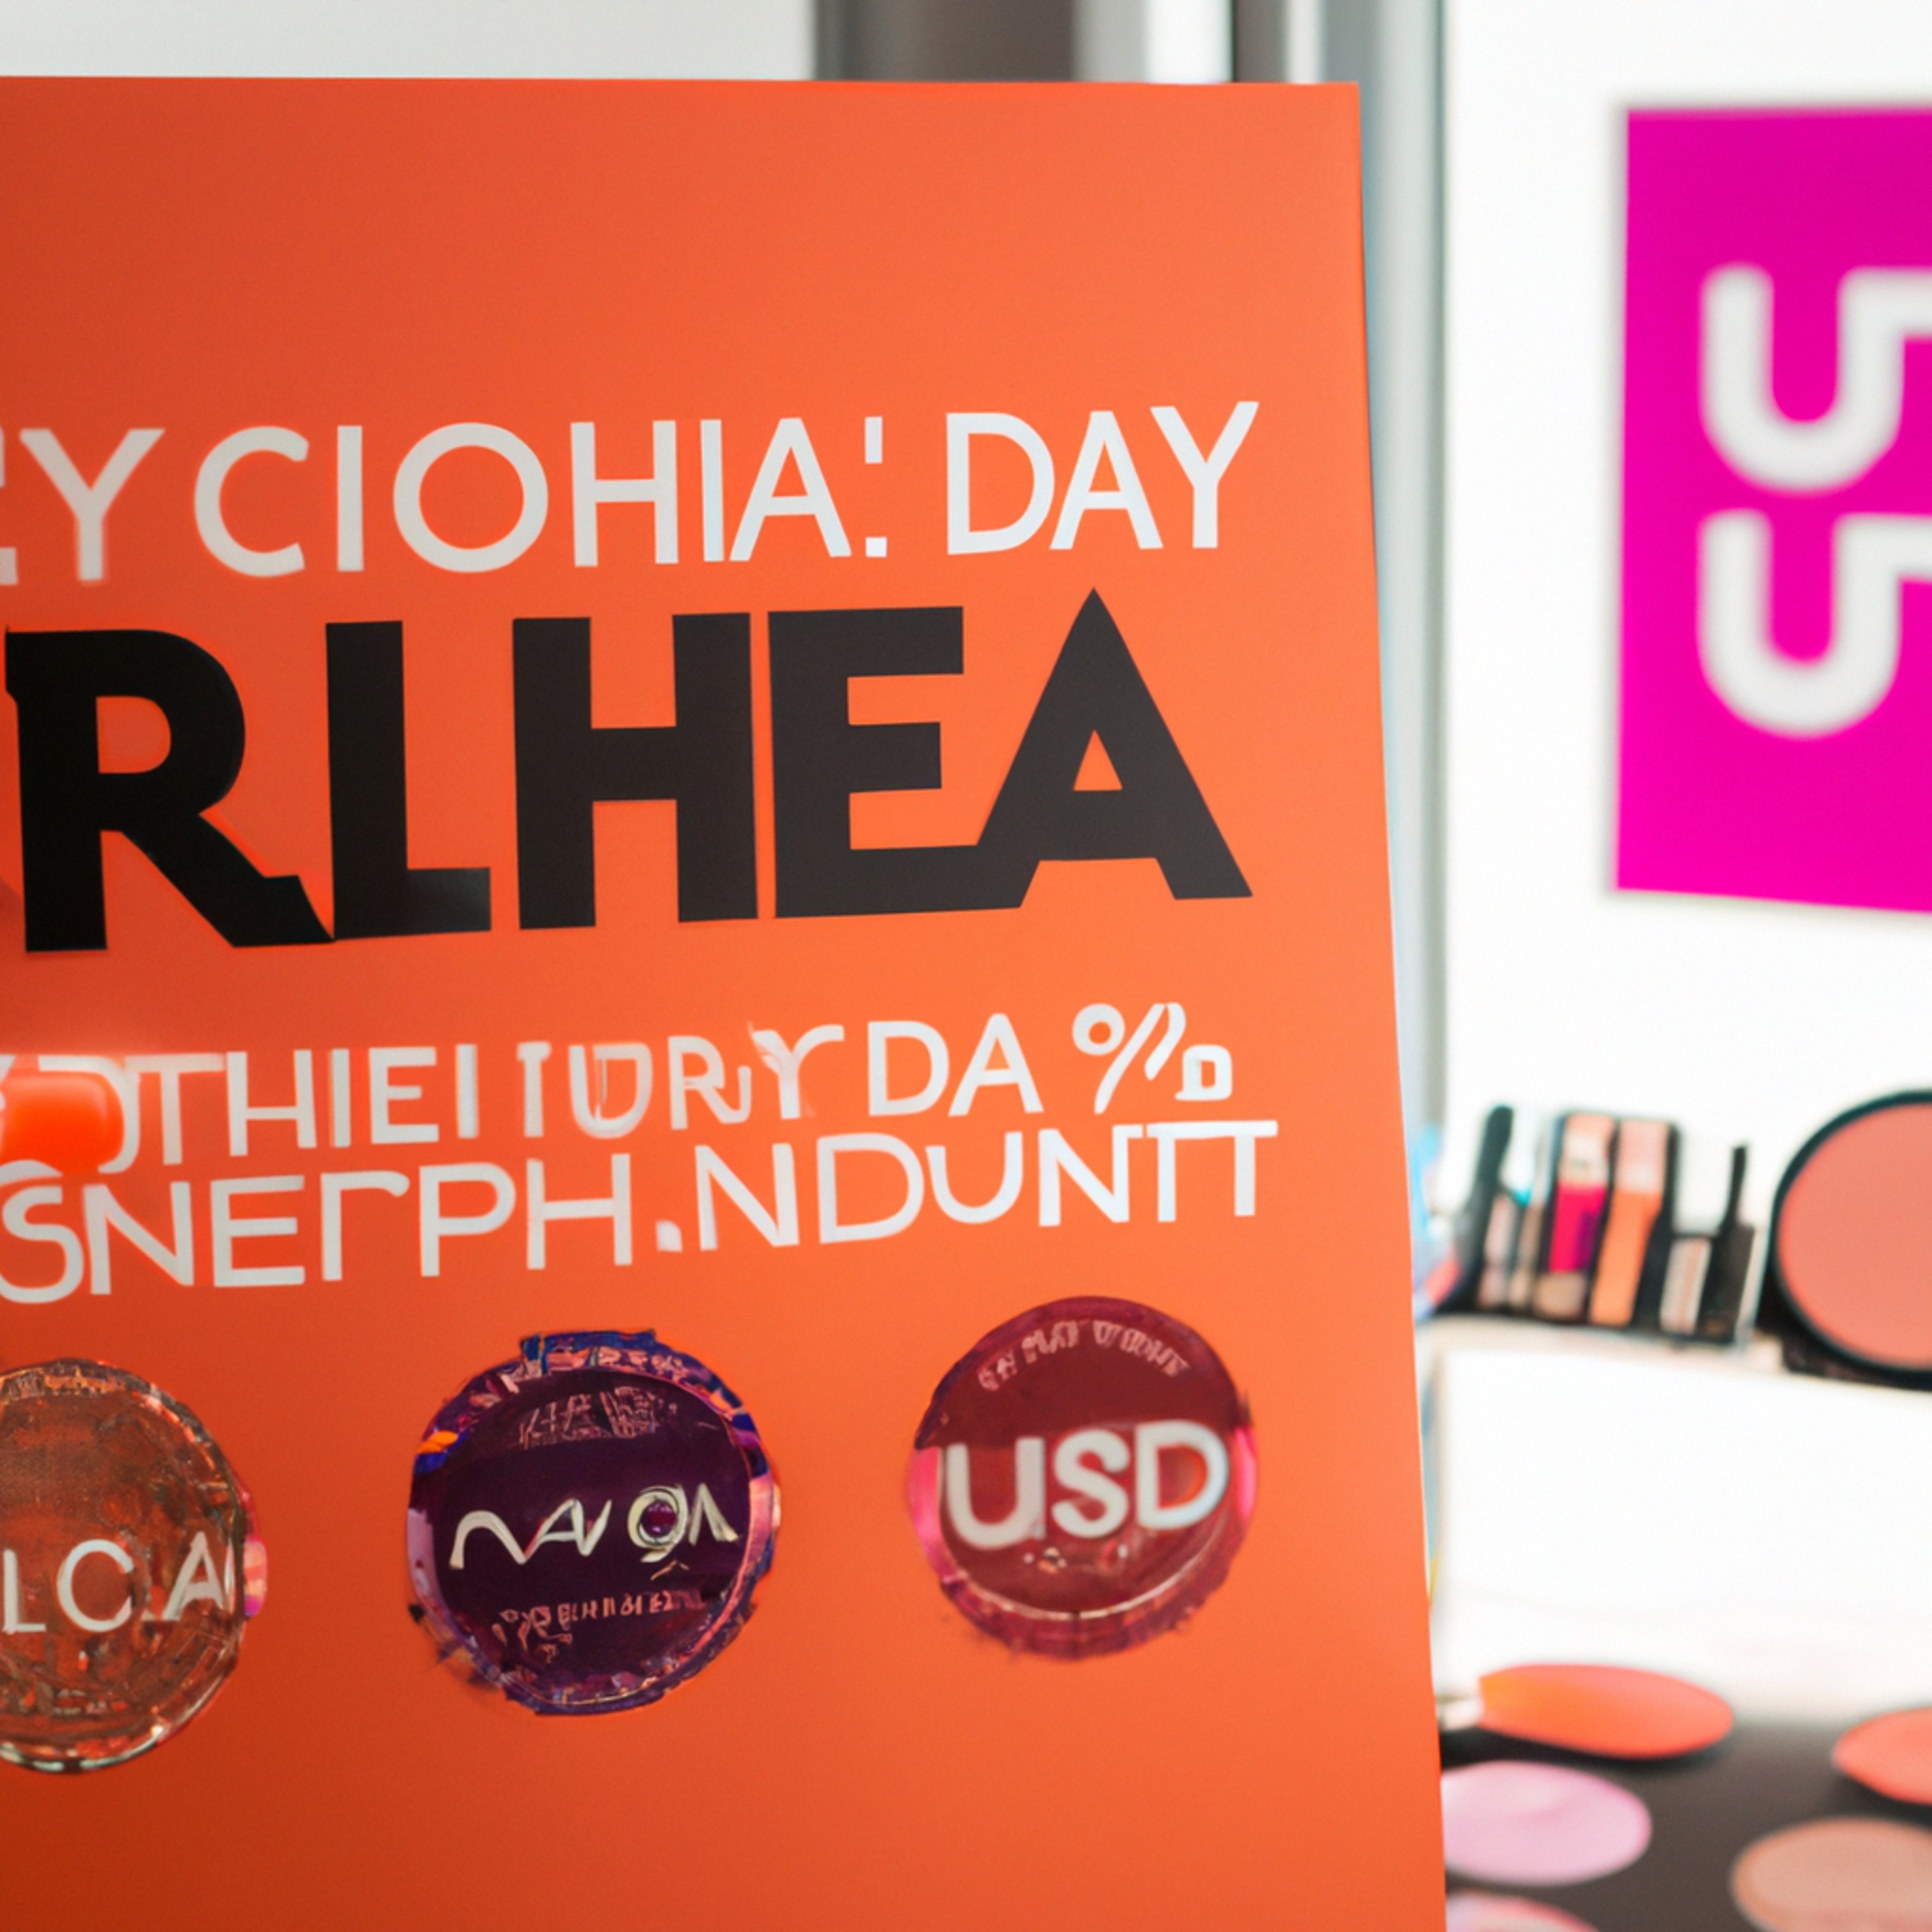 Ulta Hosts 24-Hour Flash Sale Offering 50% Off on Clinique, Urban Decay, and More